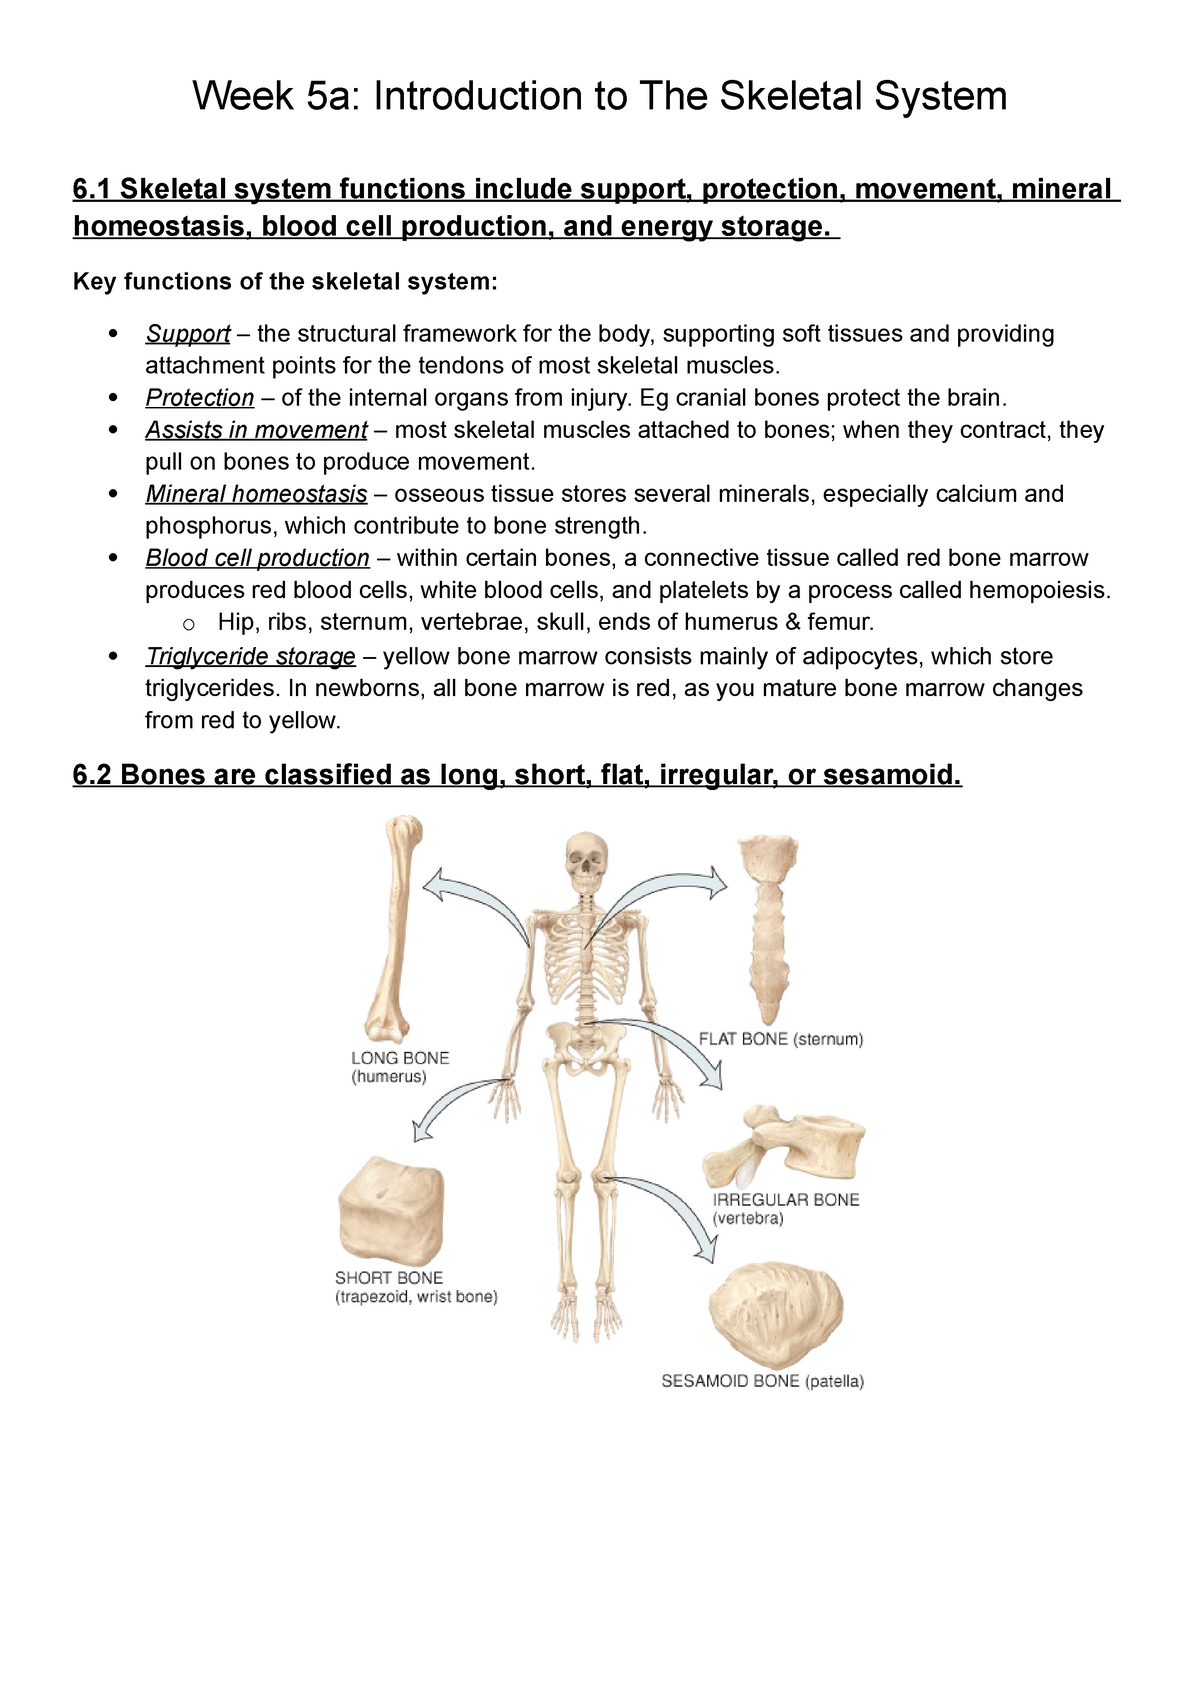 Summary Complete Introduction To The Skeletal System Week 5 Week 5a Introduction To The